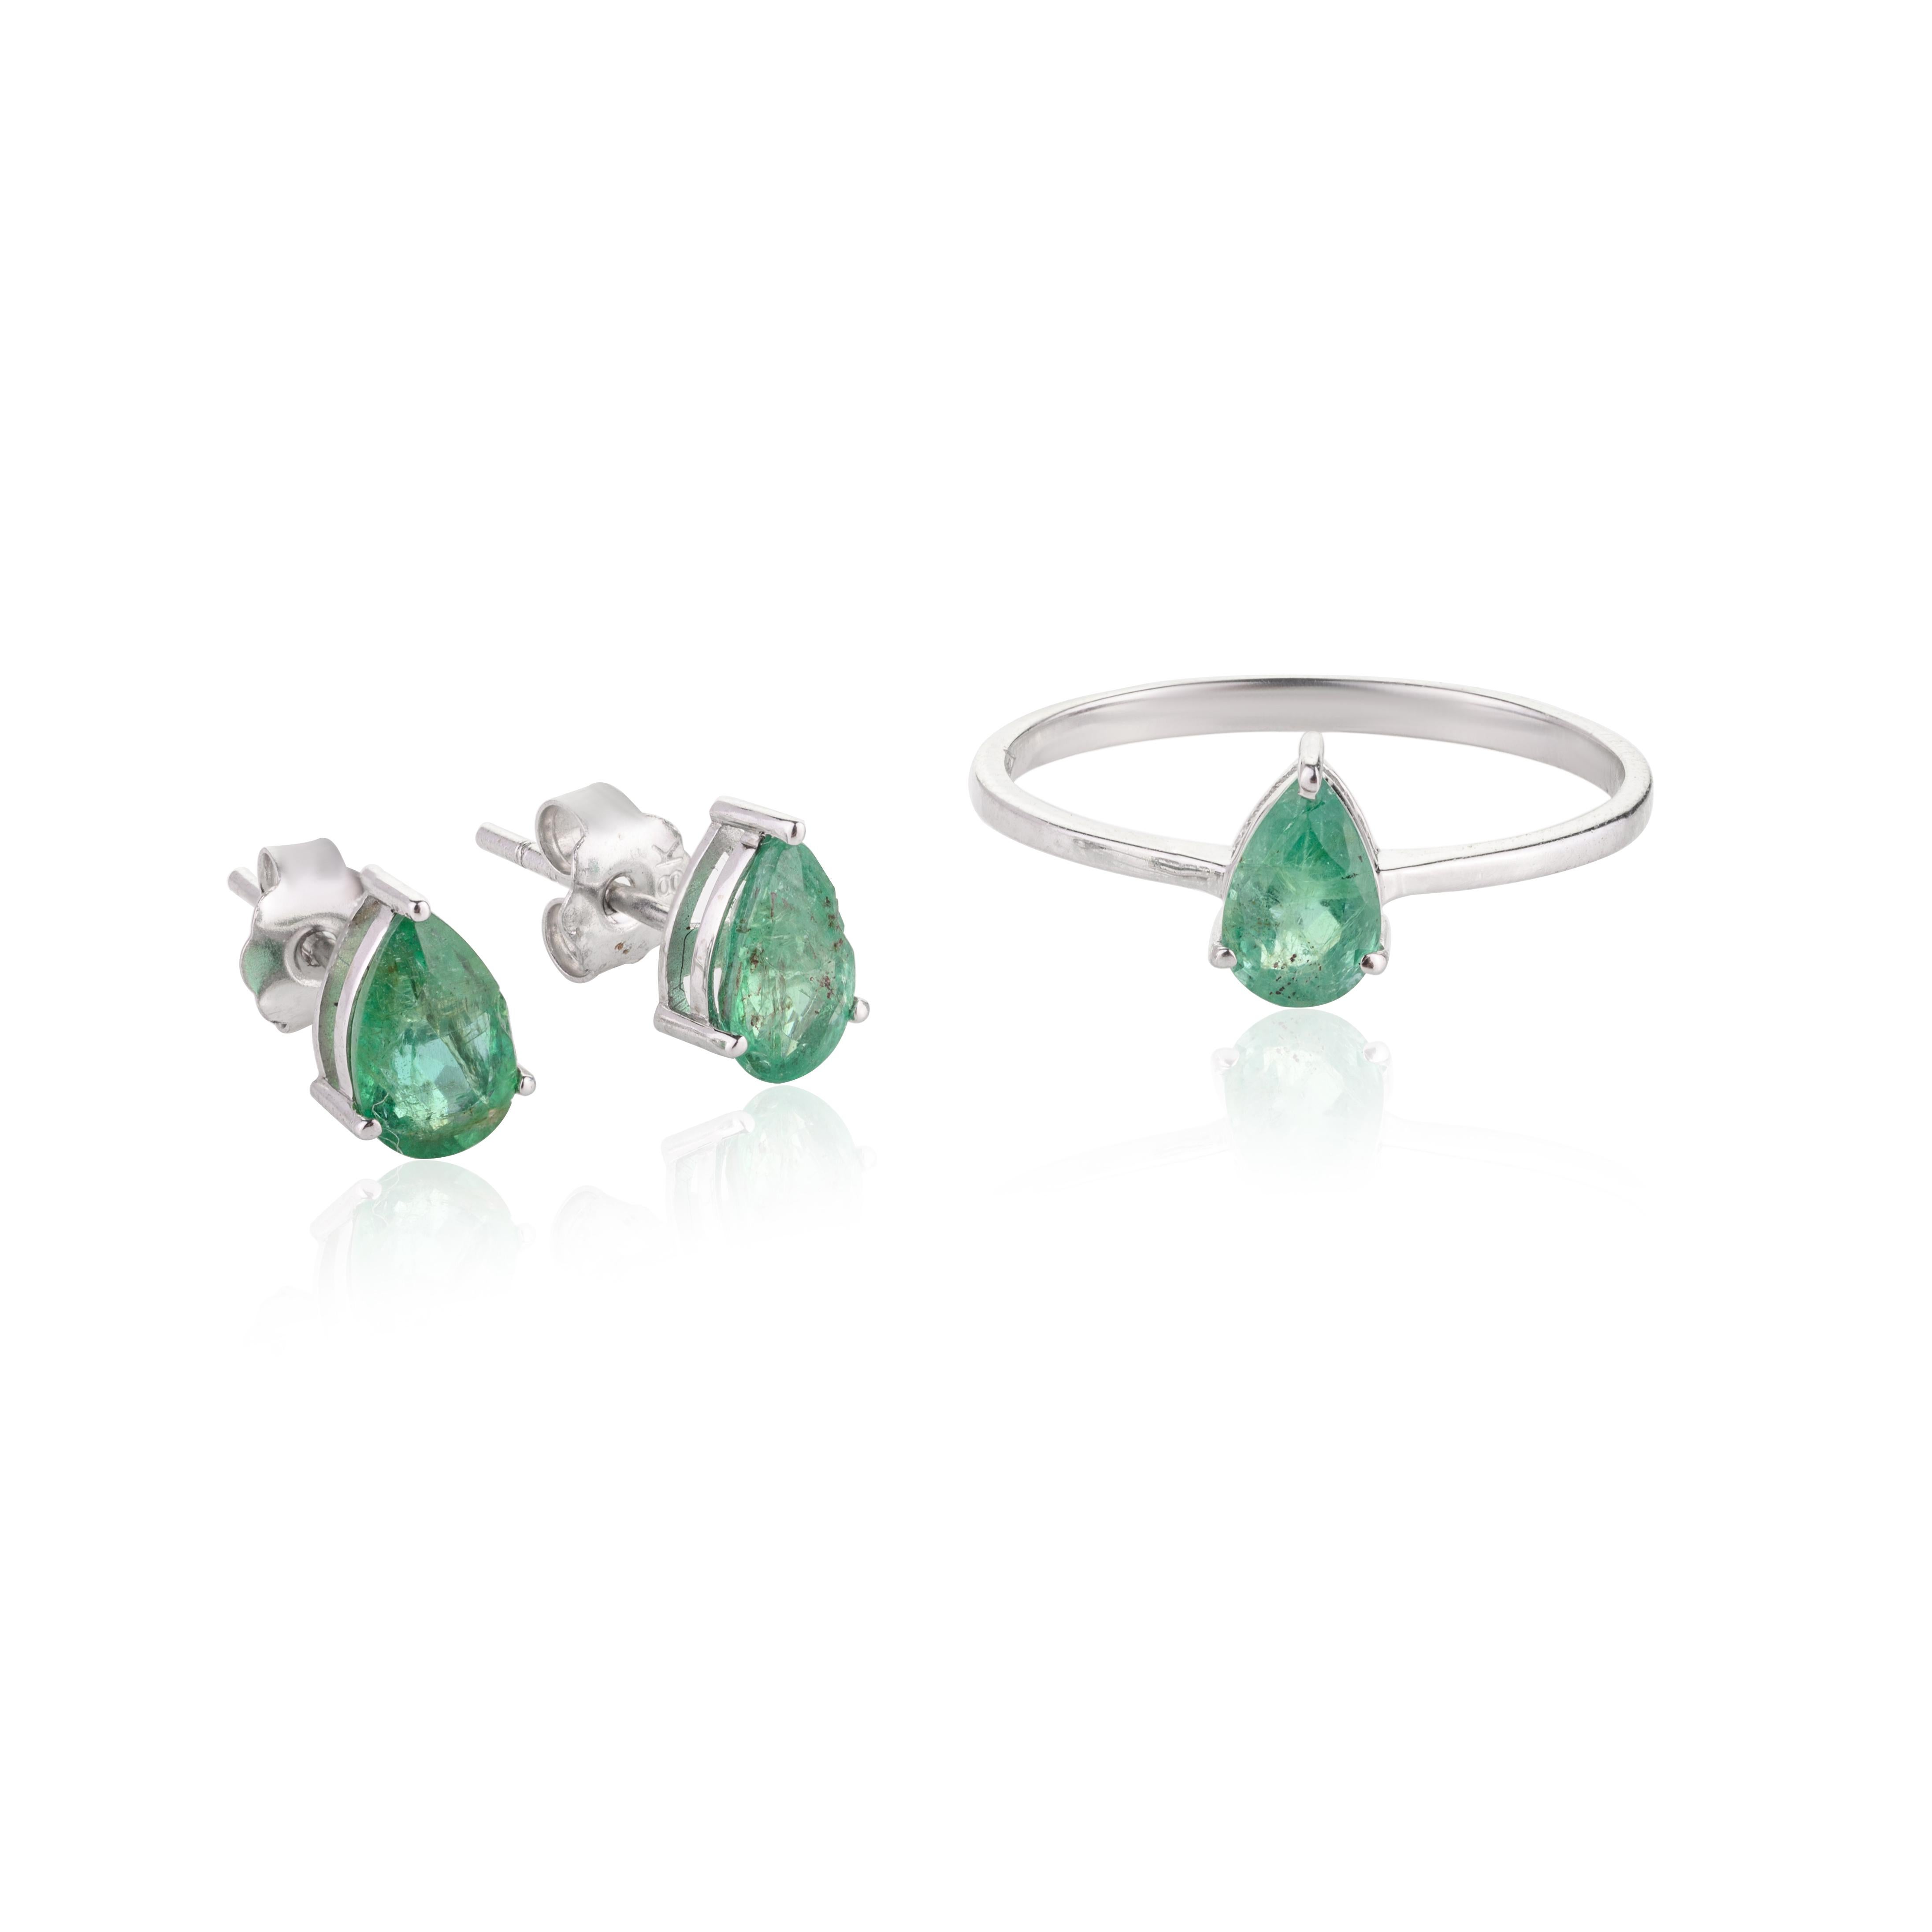 For Sale:  Dainty Emerald Ring and Earrings Jewelry Set Made in 18k Solid White Gold 13